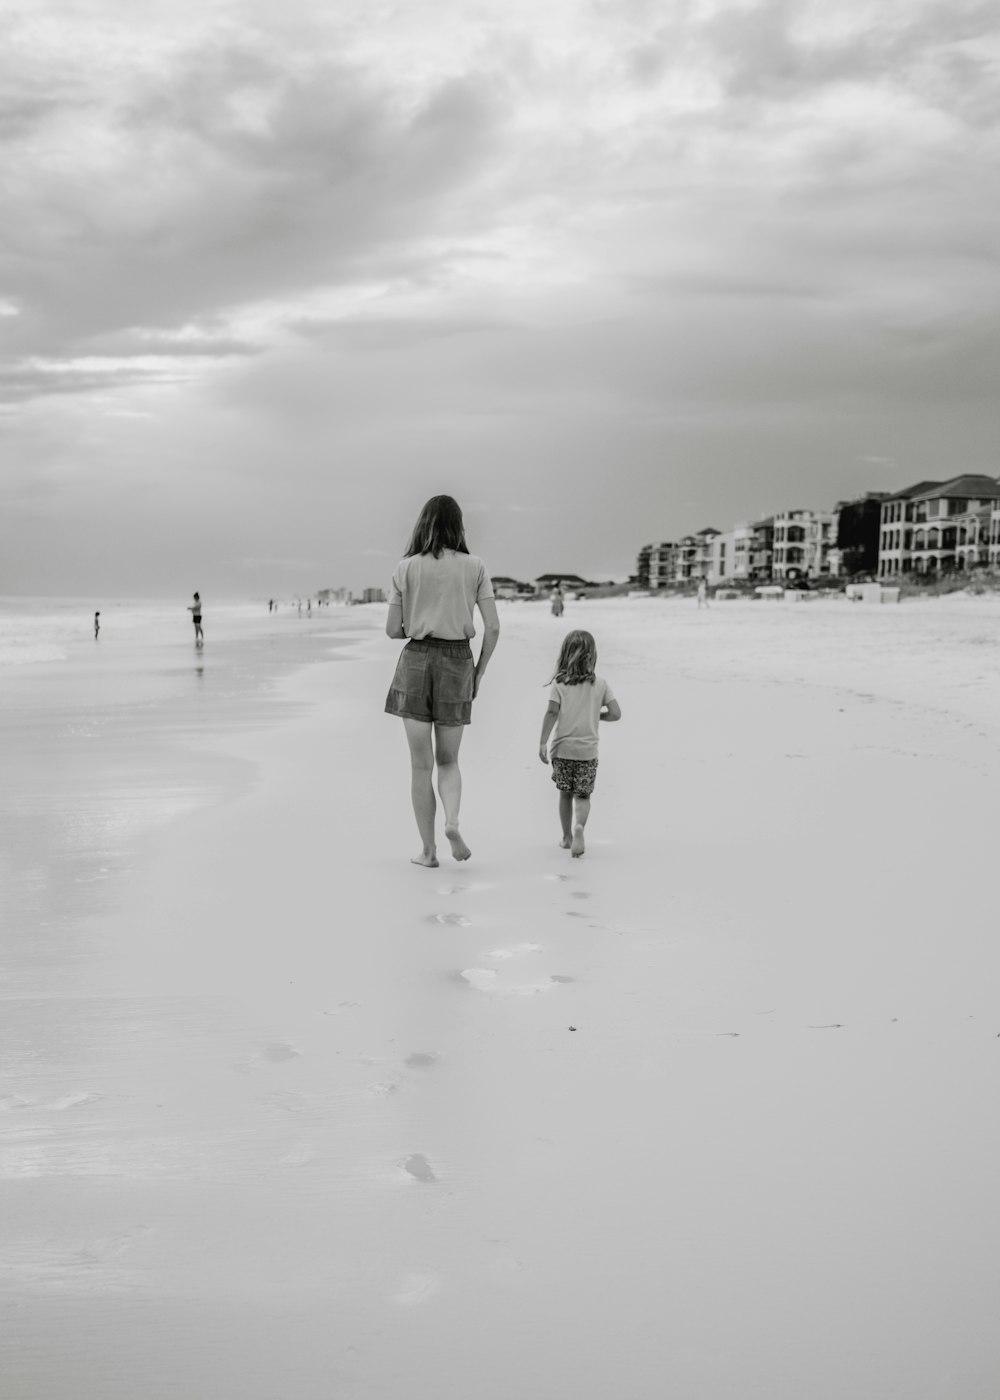 a person and a child walking on a beach